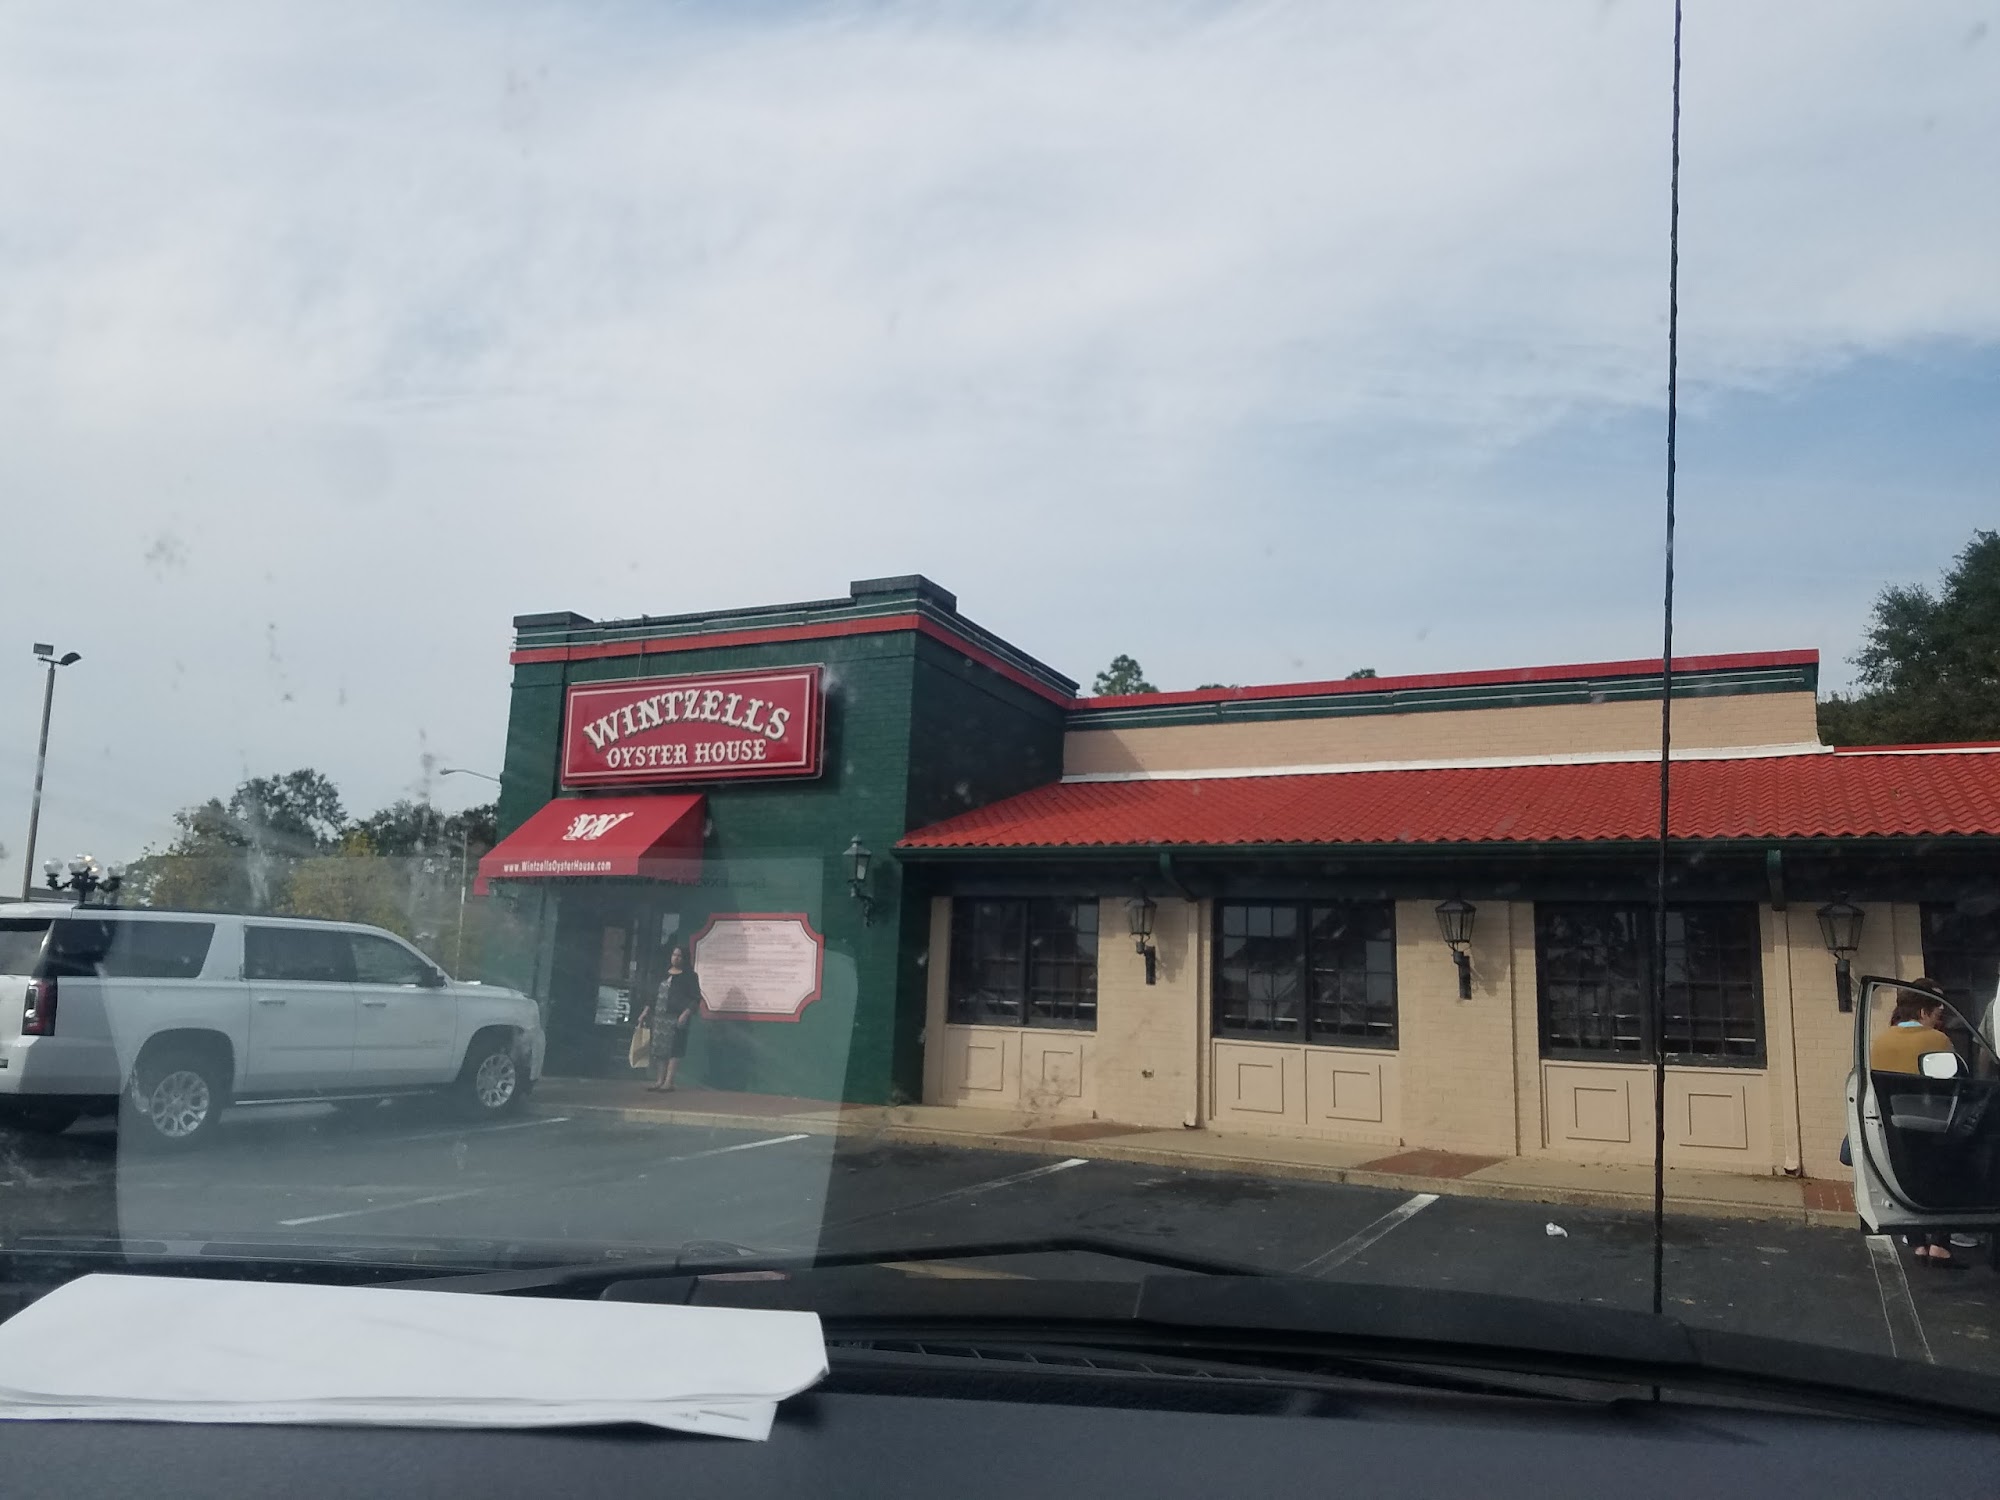 Wintzell's Oyster House 6700 Airport Blvd, Mobile, AL 36608